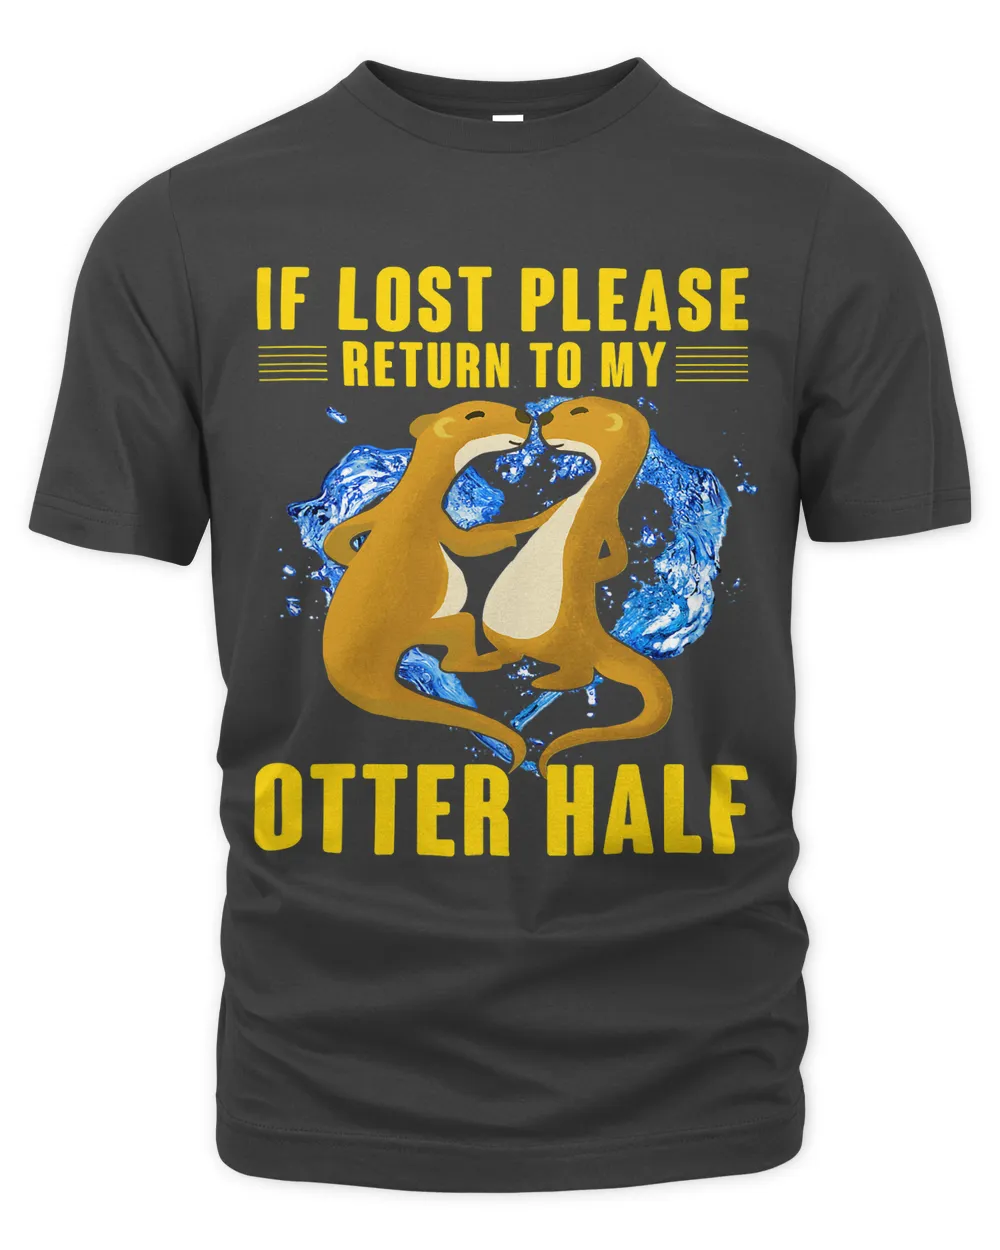 If lost please Return to my Otter Half